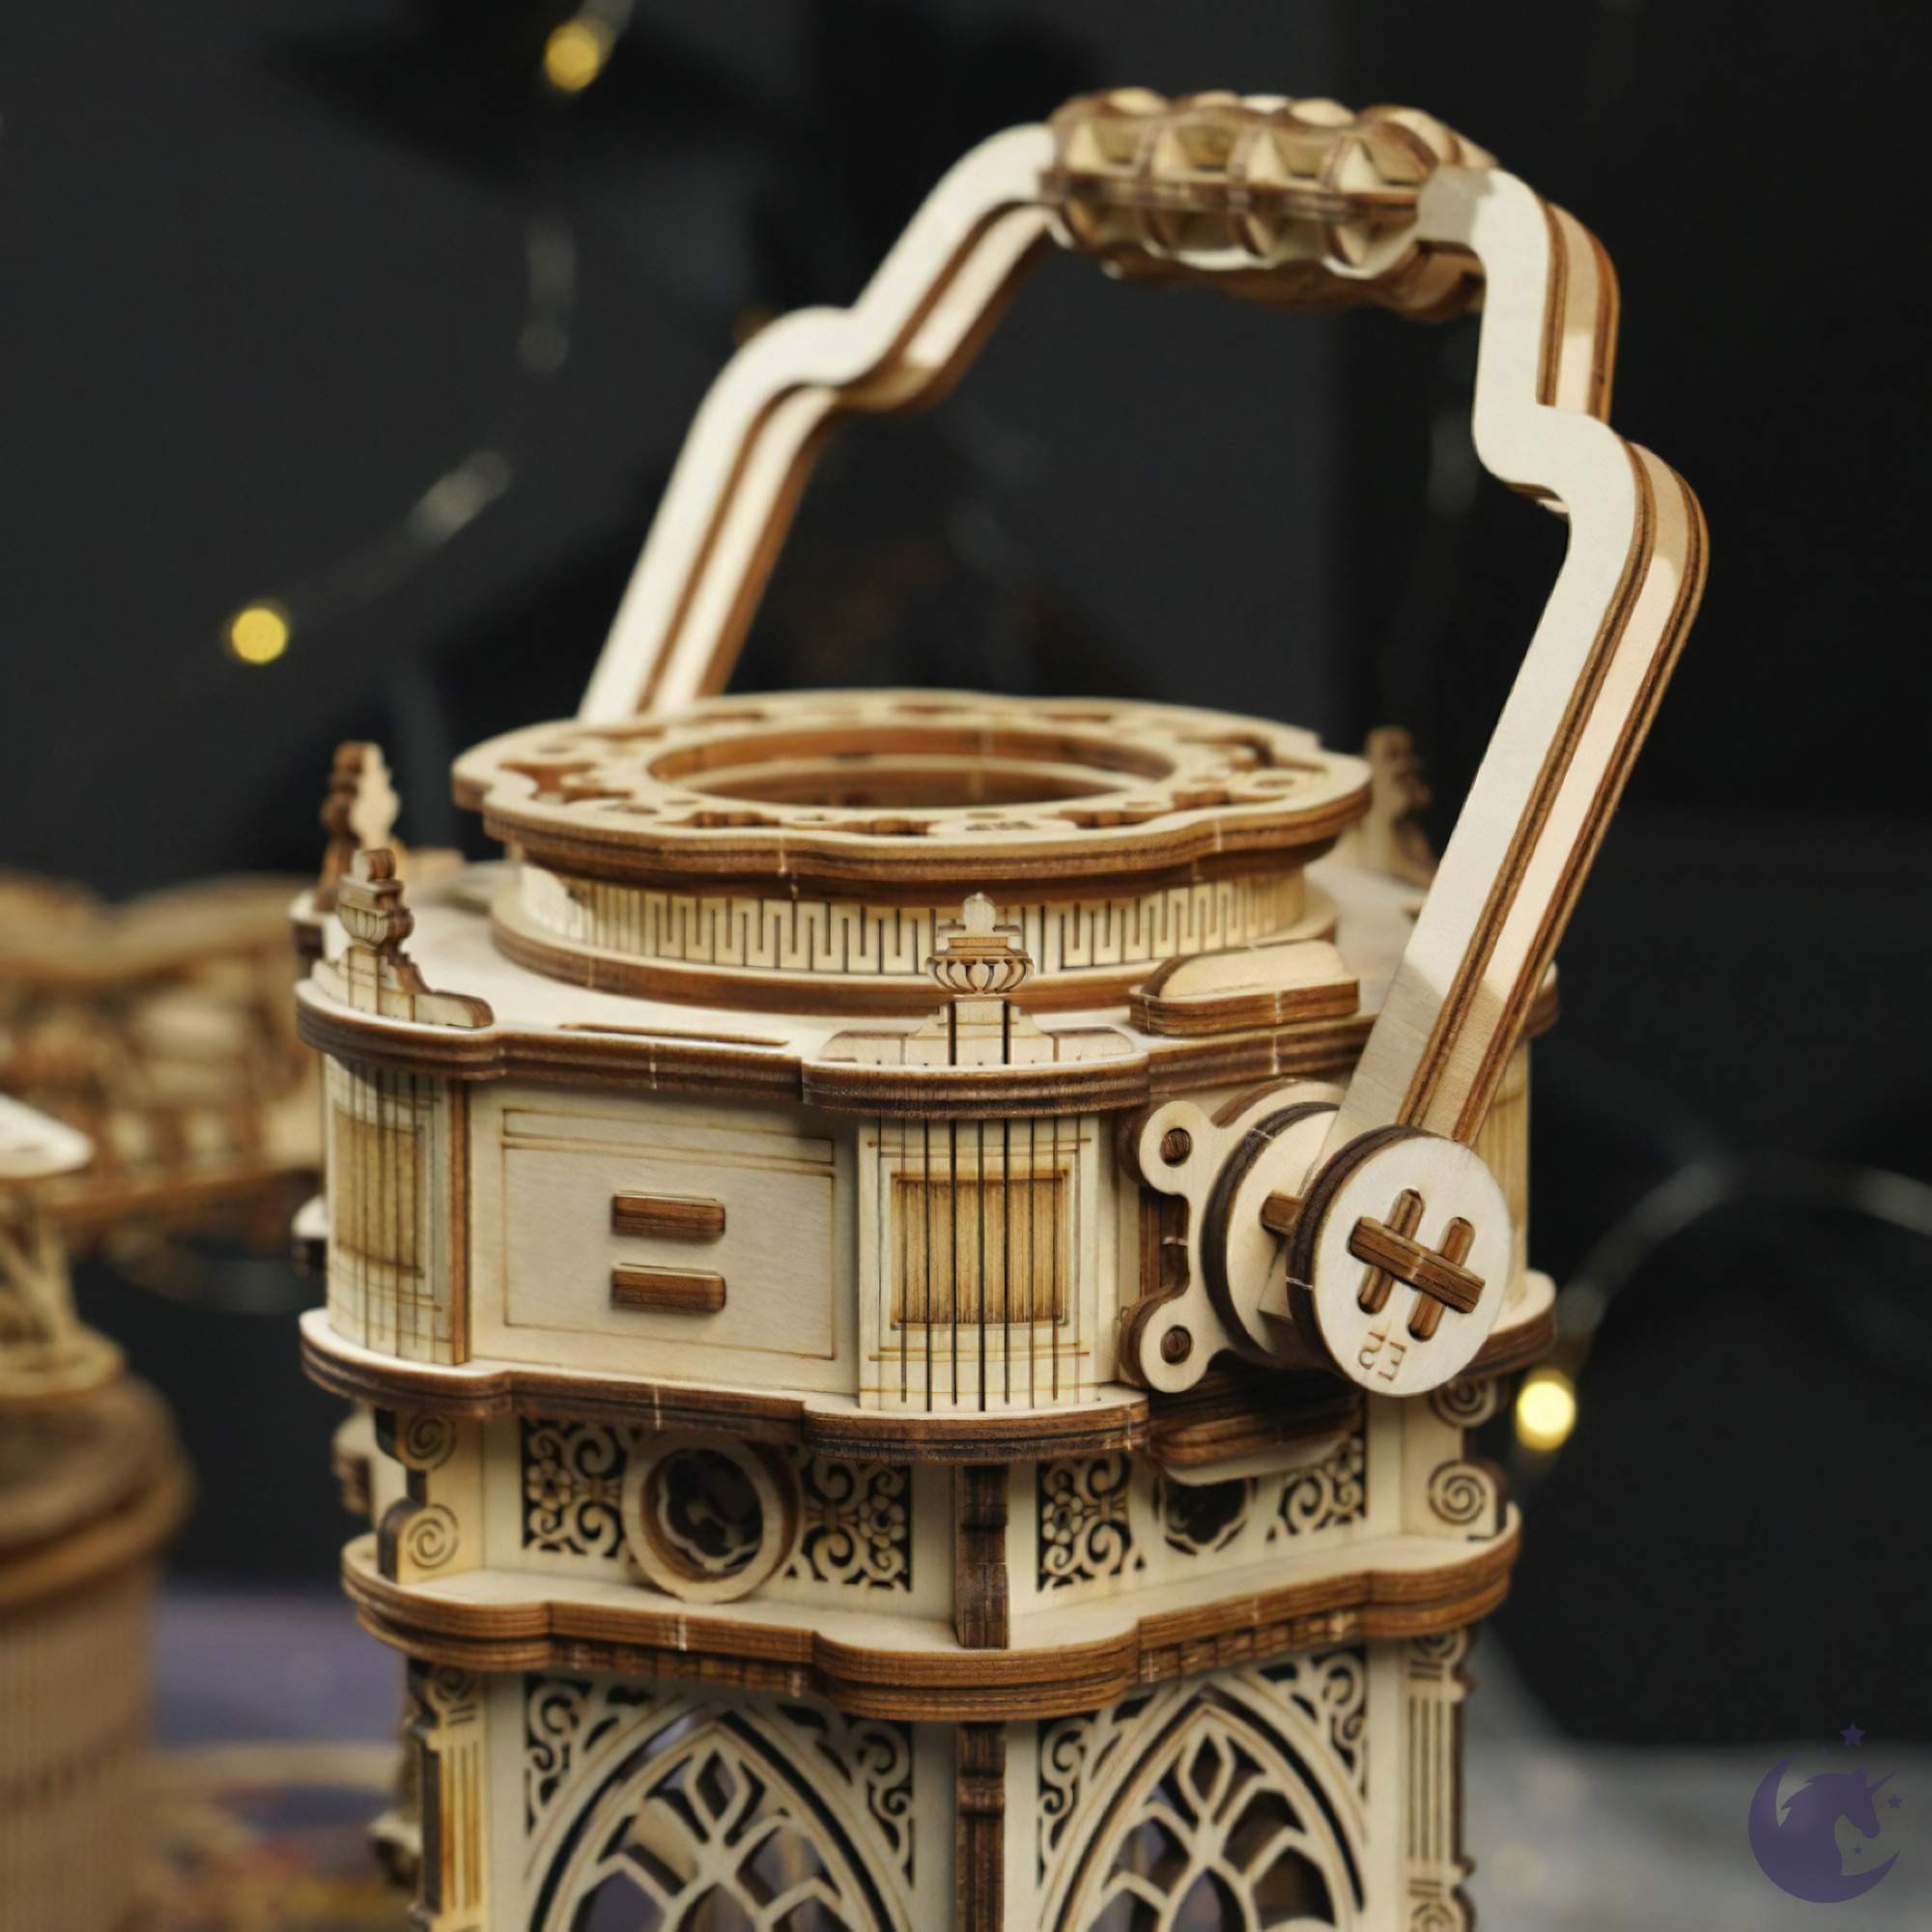 unicorntoys robotime rokr victorian latern diy mechanical music box 3d wooden puzzle kit birthday gifts for teen AMK61